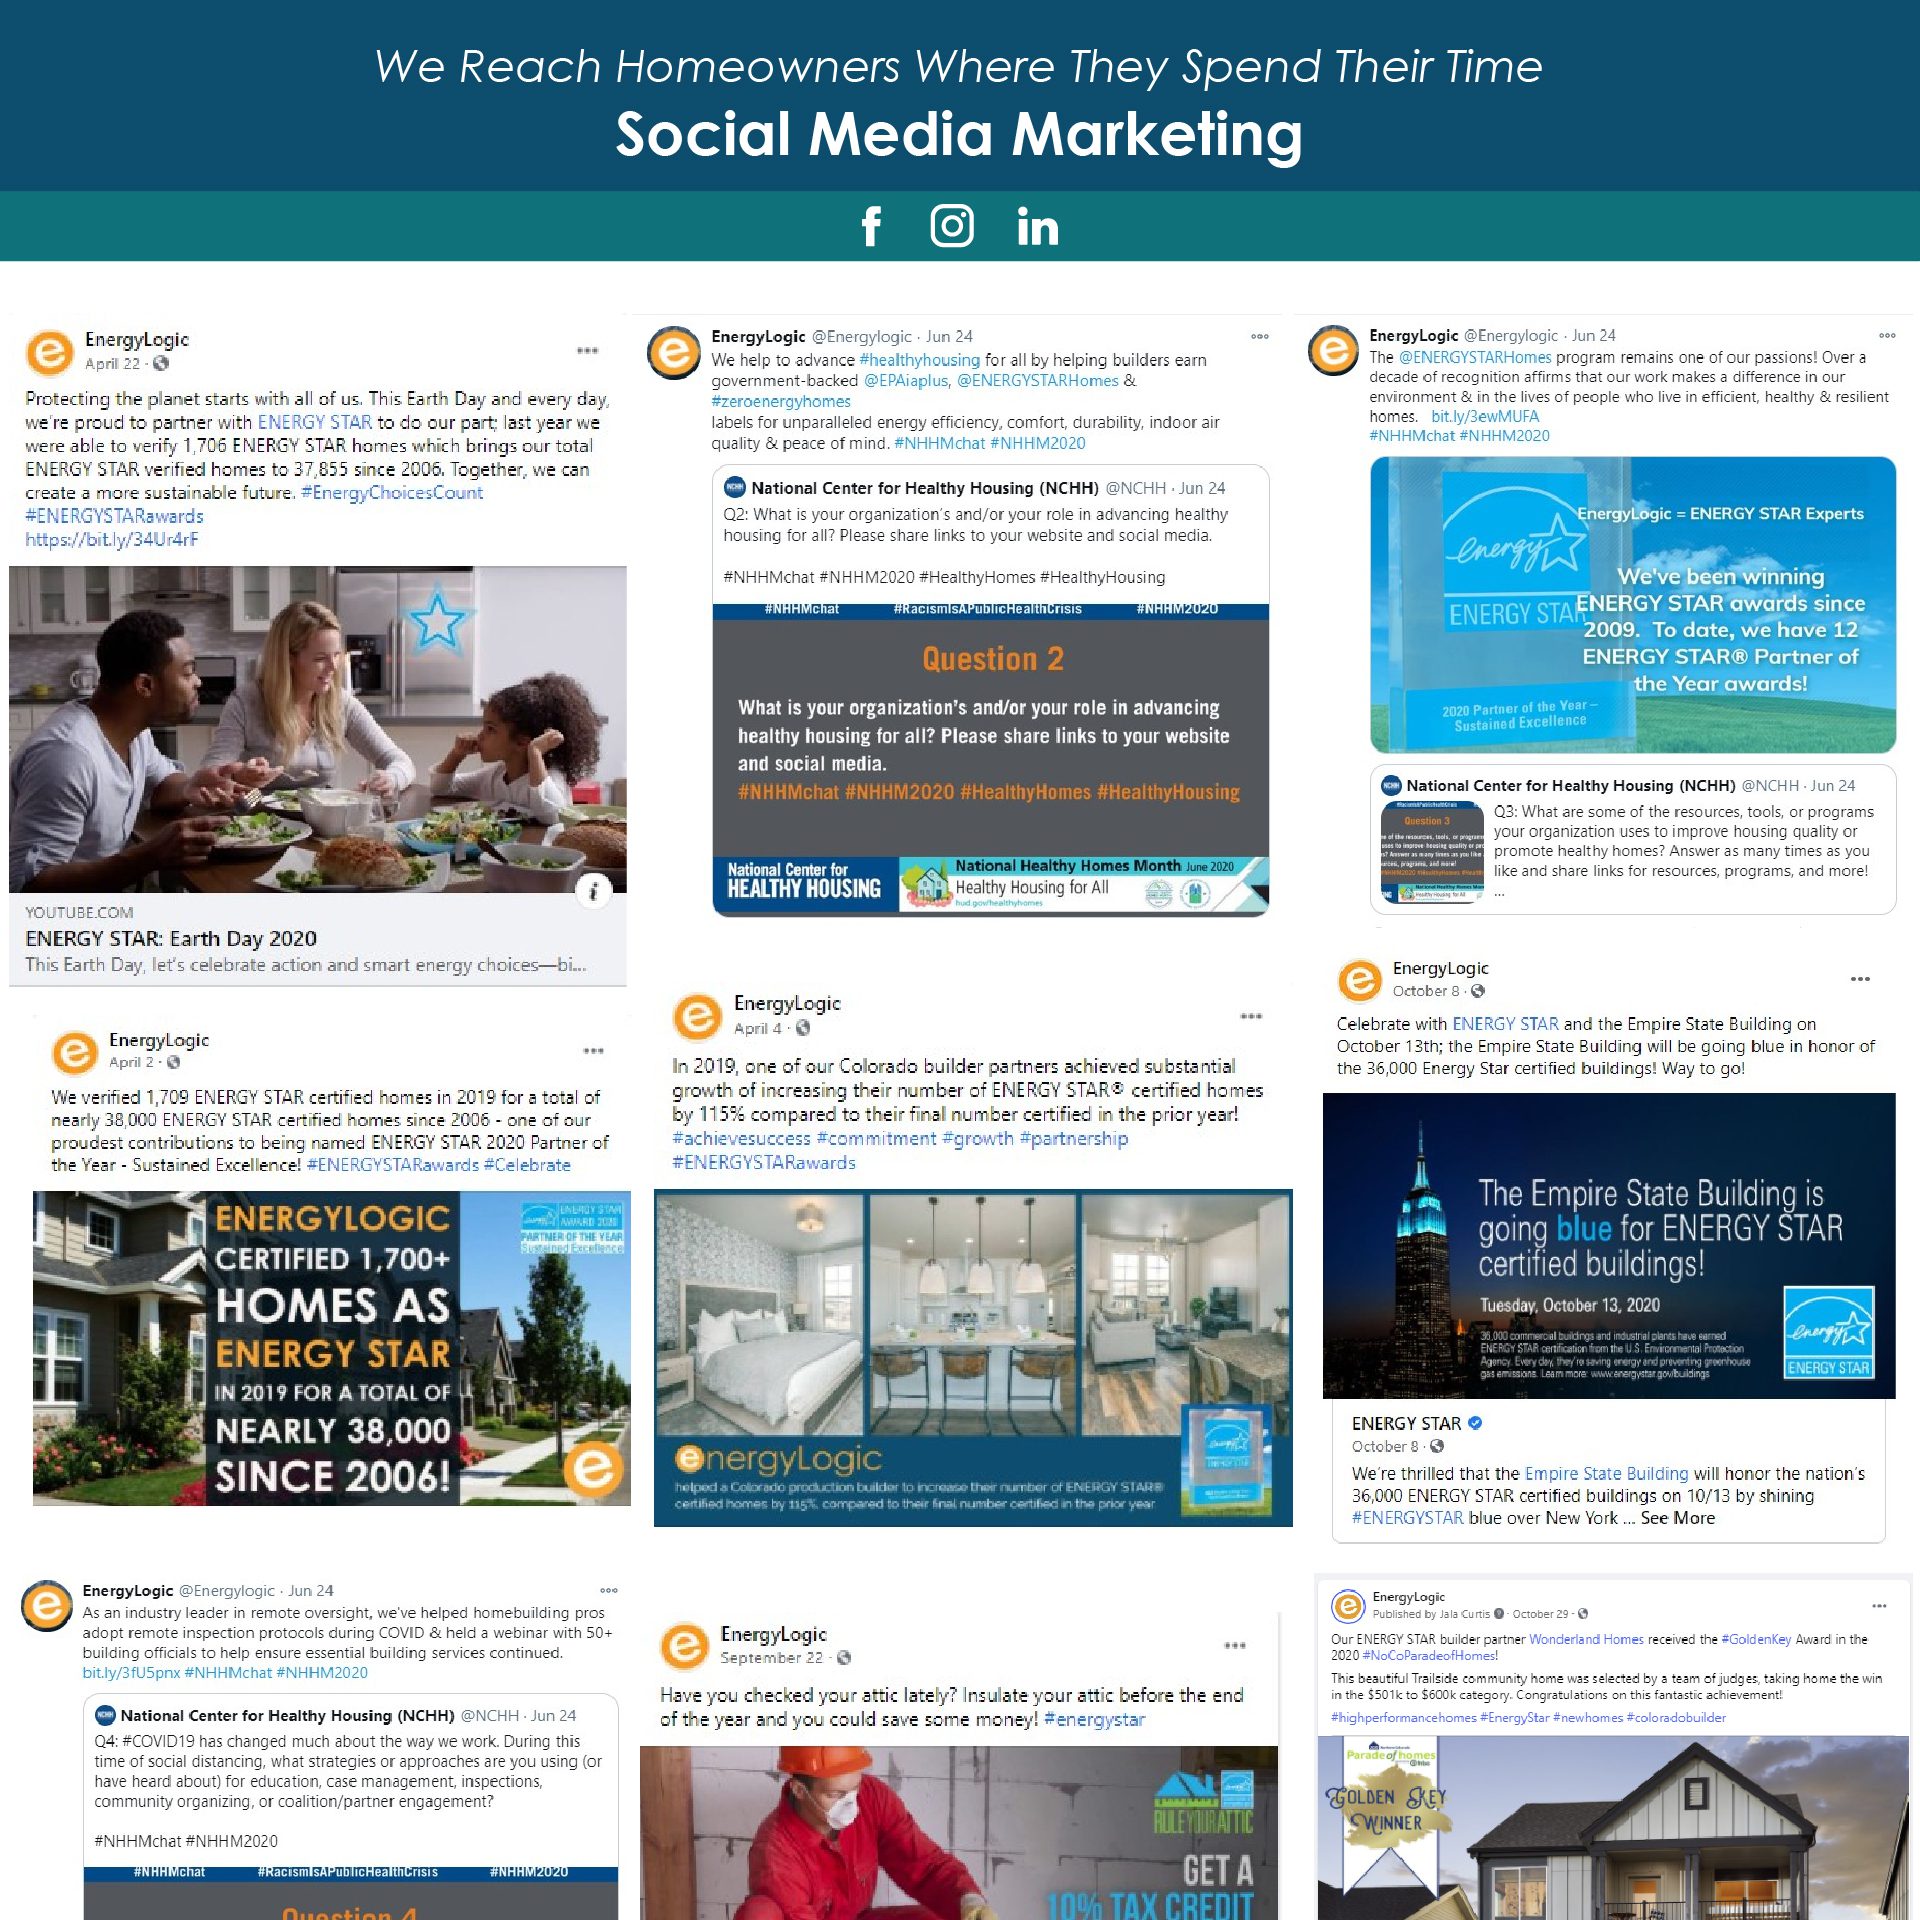 Indoor airPLUS Awards 2020 EnergyLogic's Social Media Focus and Examples